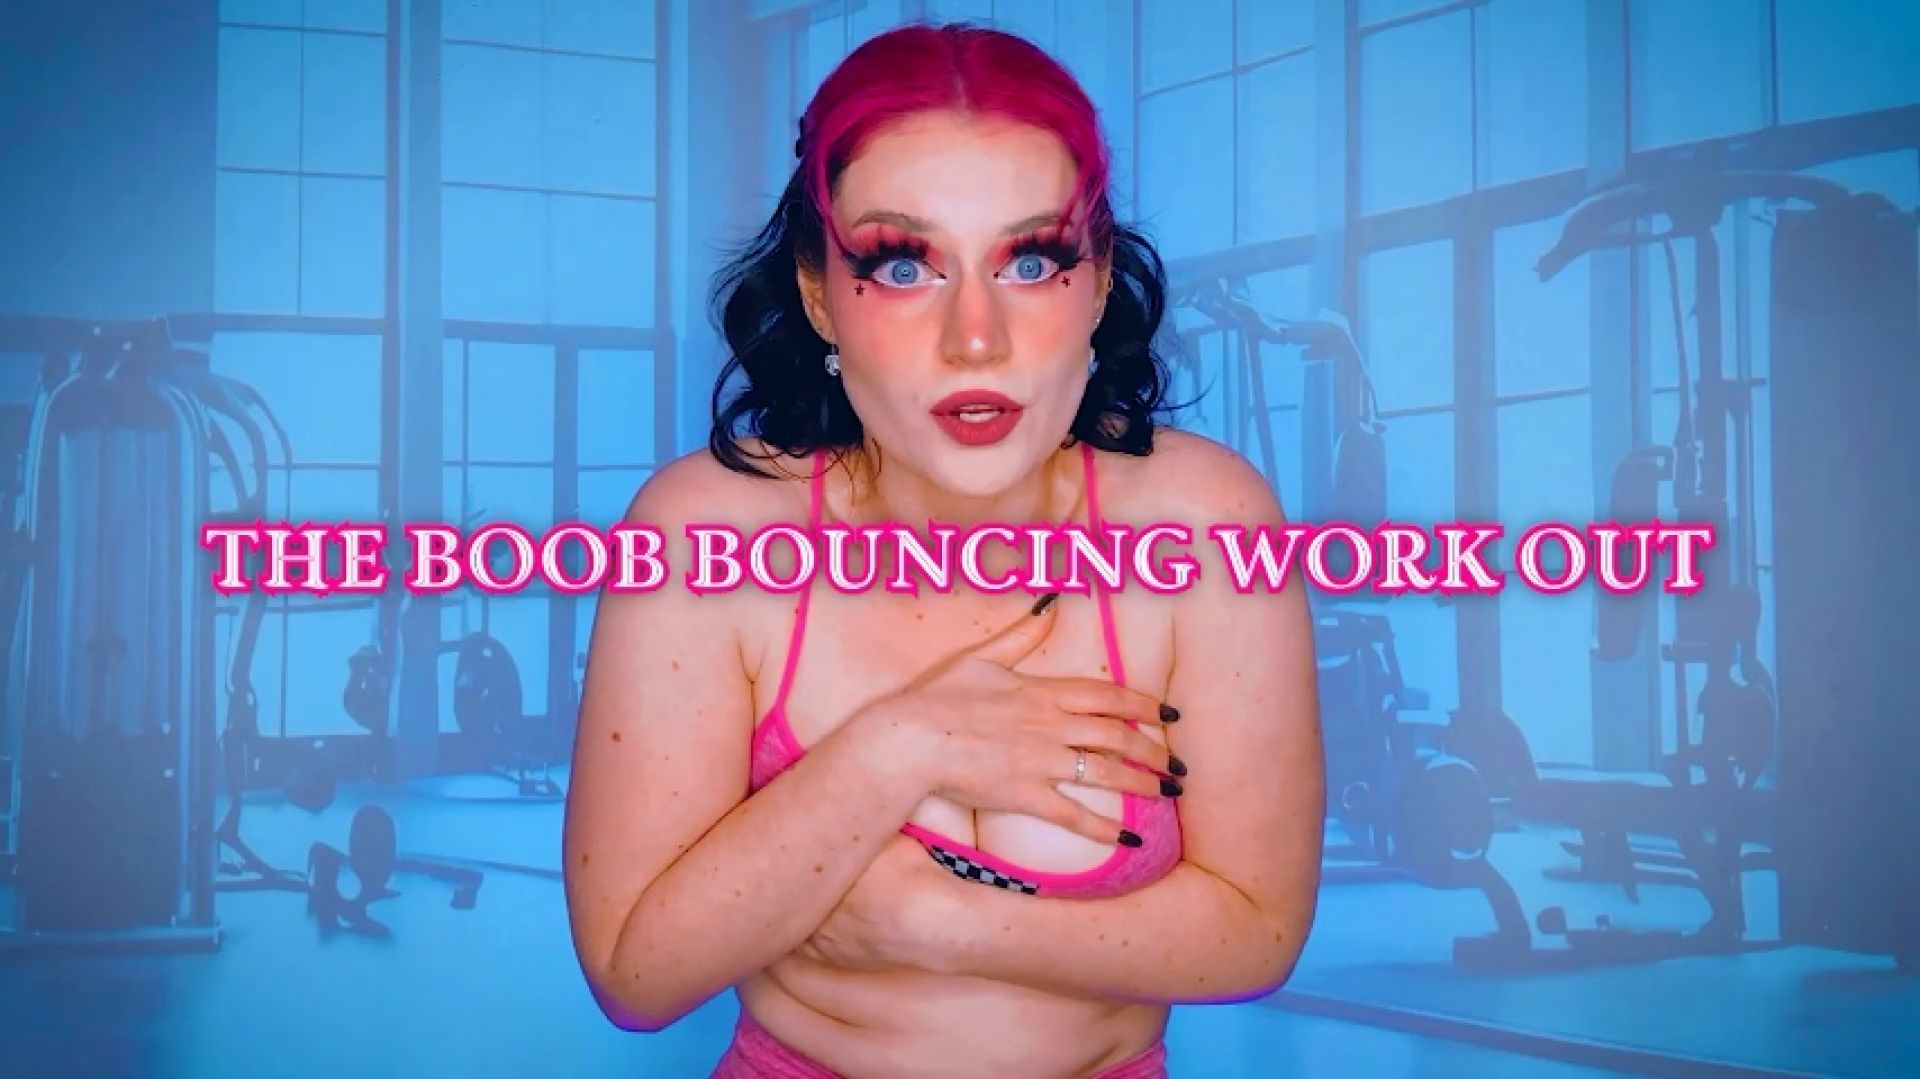 The Boob Bouncing Work Out